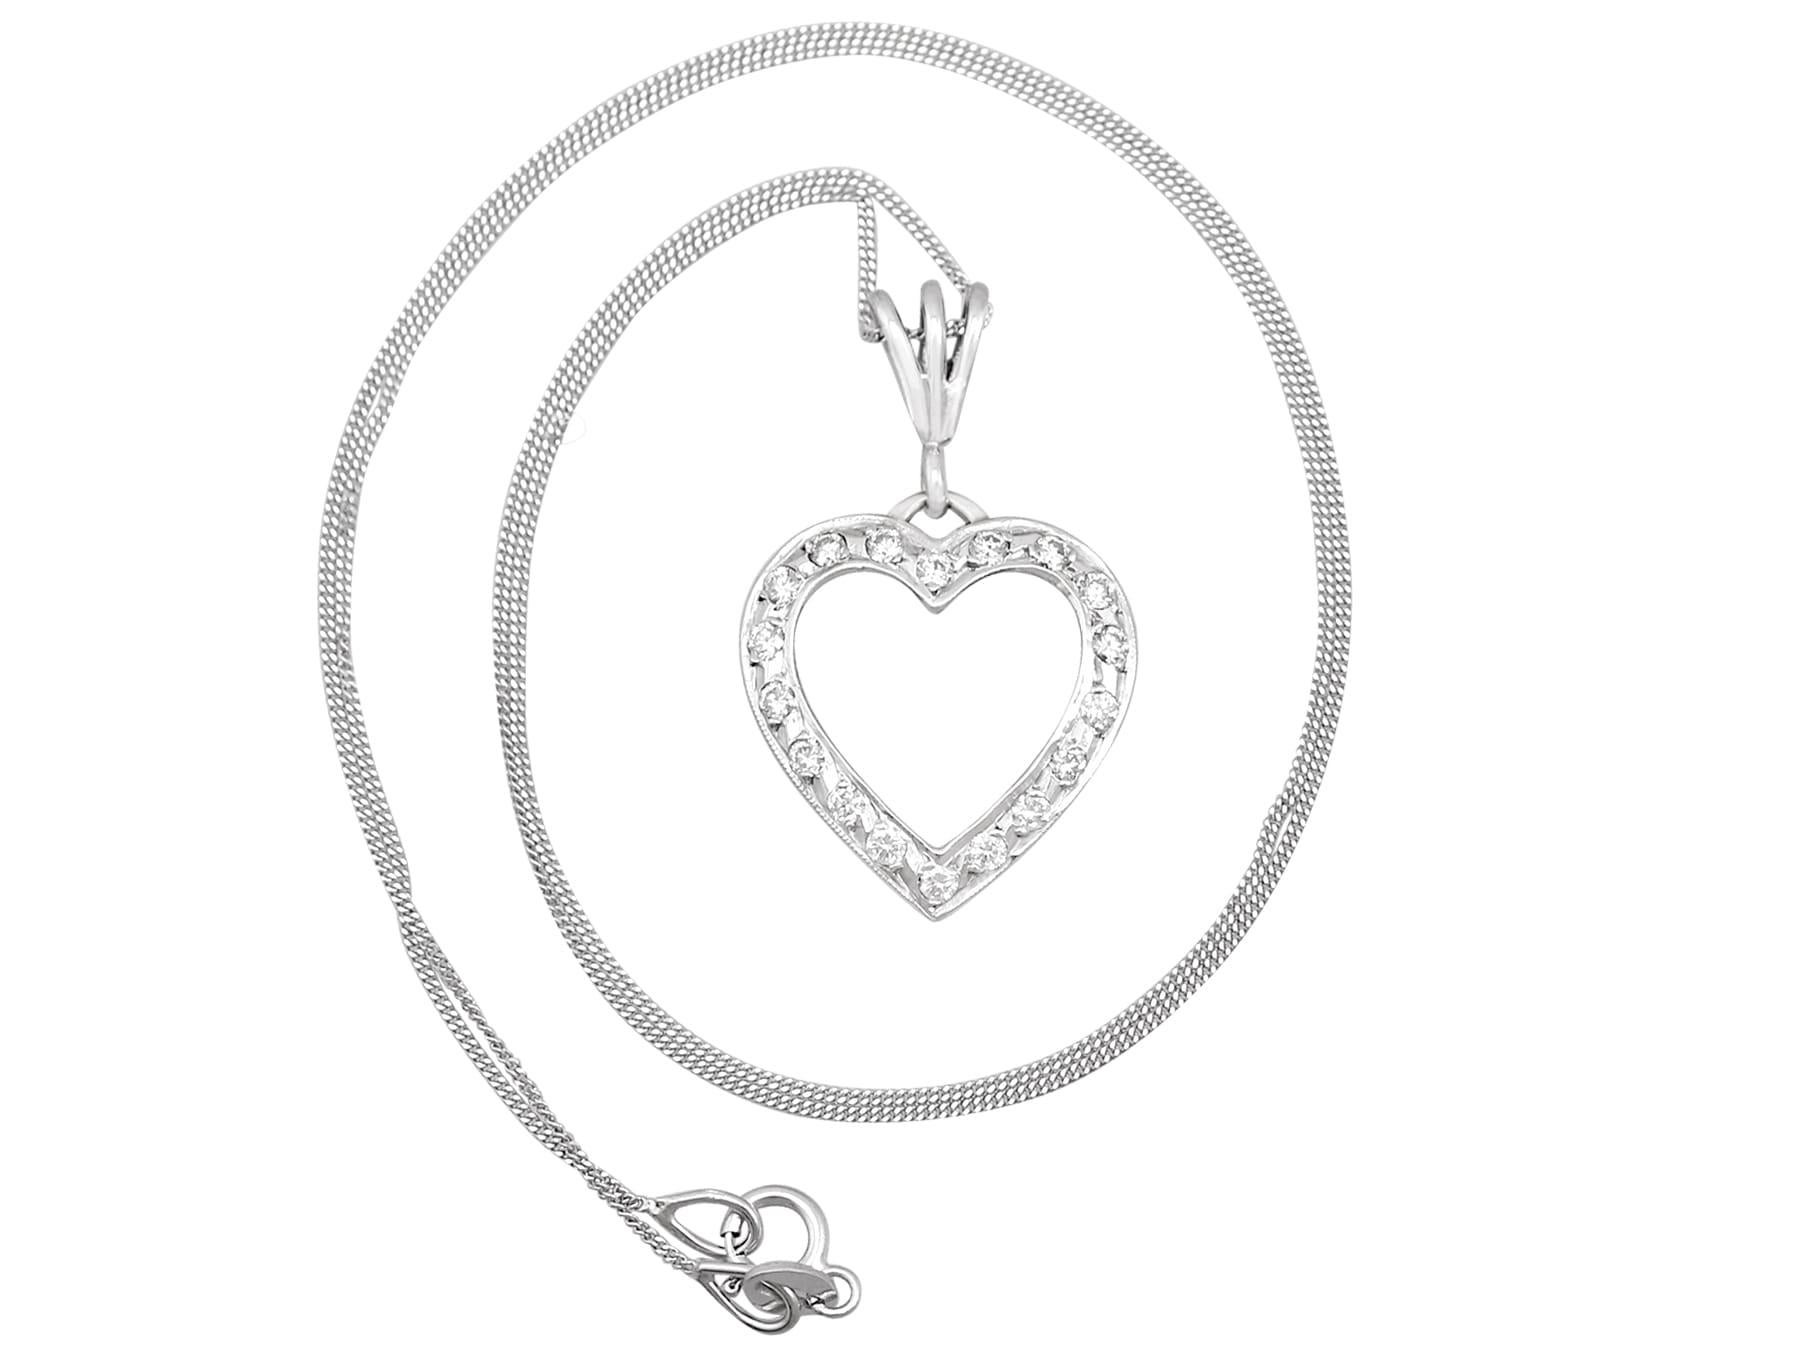 An impressive vintage 1960s Italian 0.28Ct diamond and 18k white gold heart shaped pendant; part of our diverse vintage jewelry and estate jewelry collections.

This fine and impressive 1960s heart pendant has been crafted in 18k white gold.

The